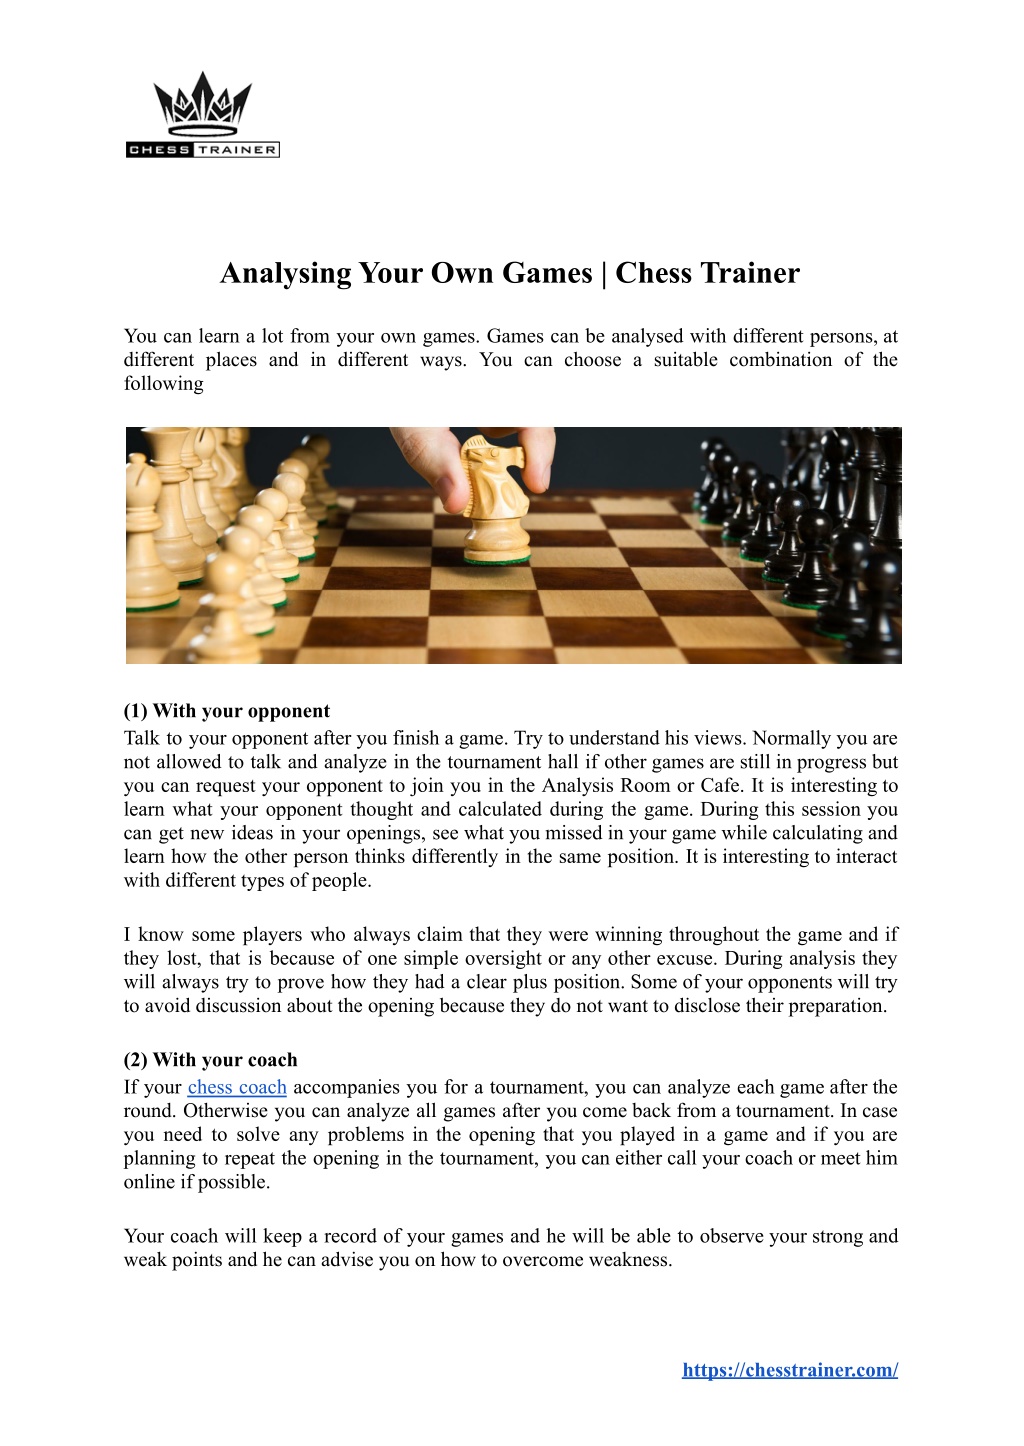 Review your chess game with human analysis by Chesscoach